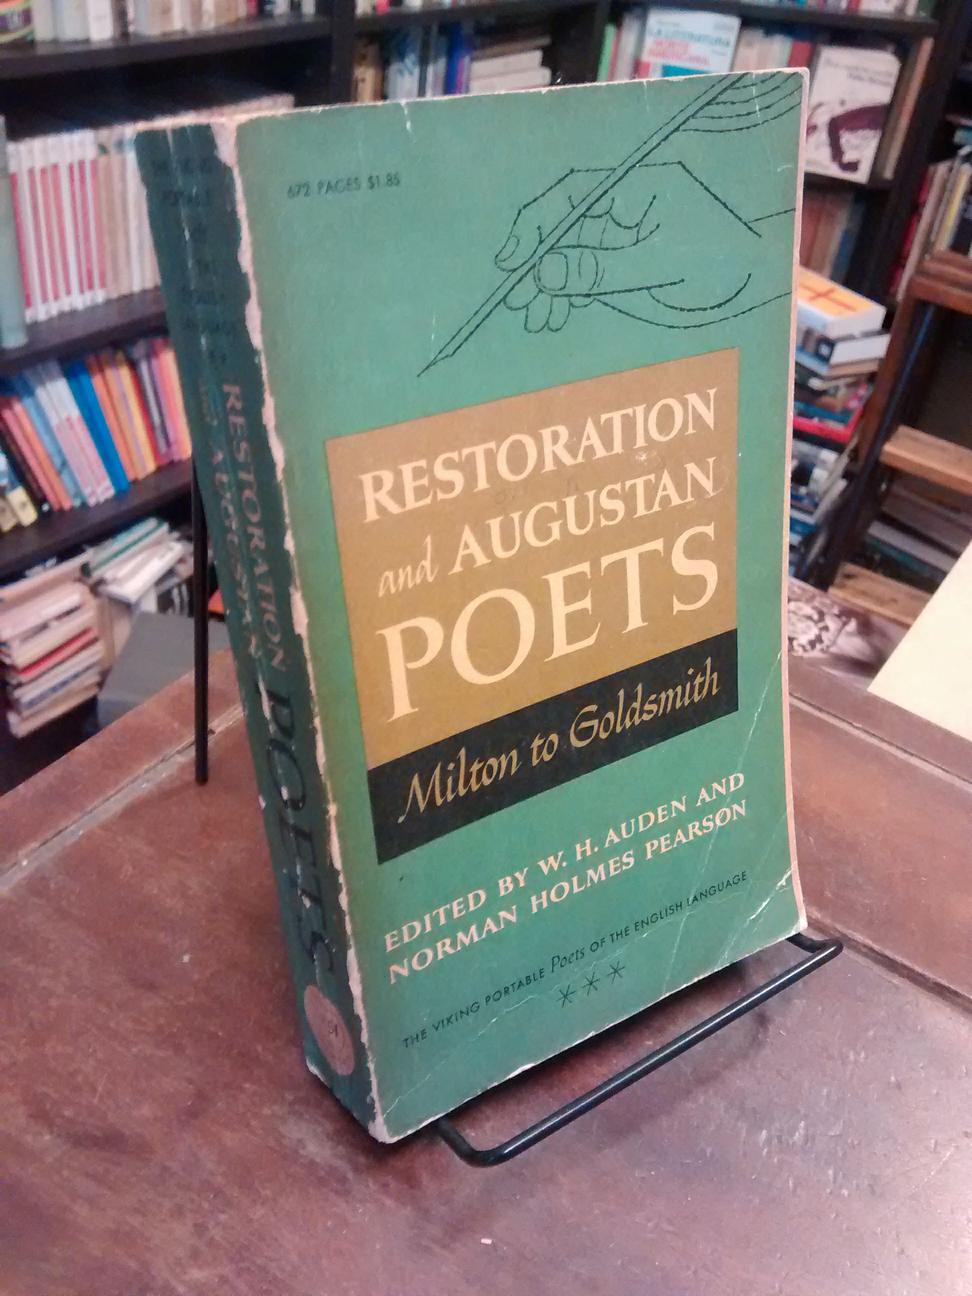 Restoration and Augustan Poets - W. H. Auden · Norman Holmes Pearson